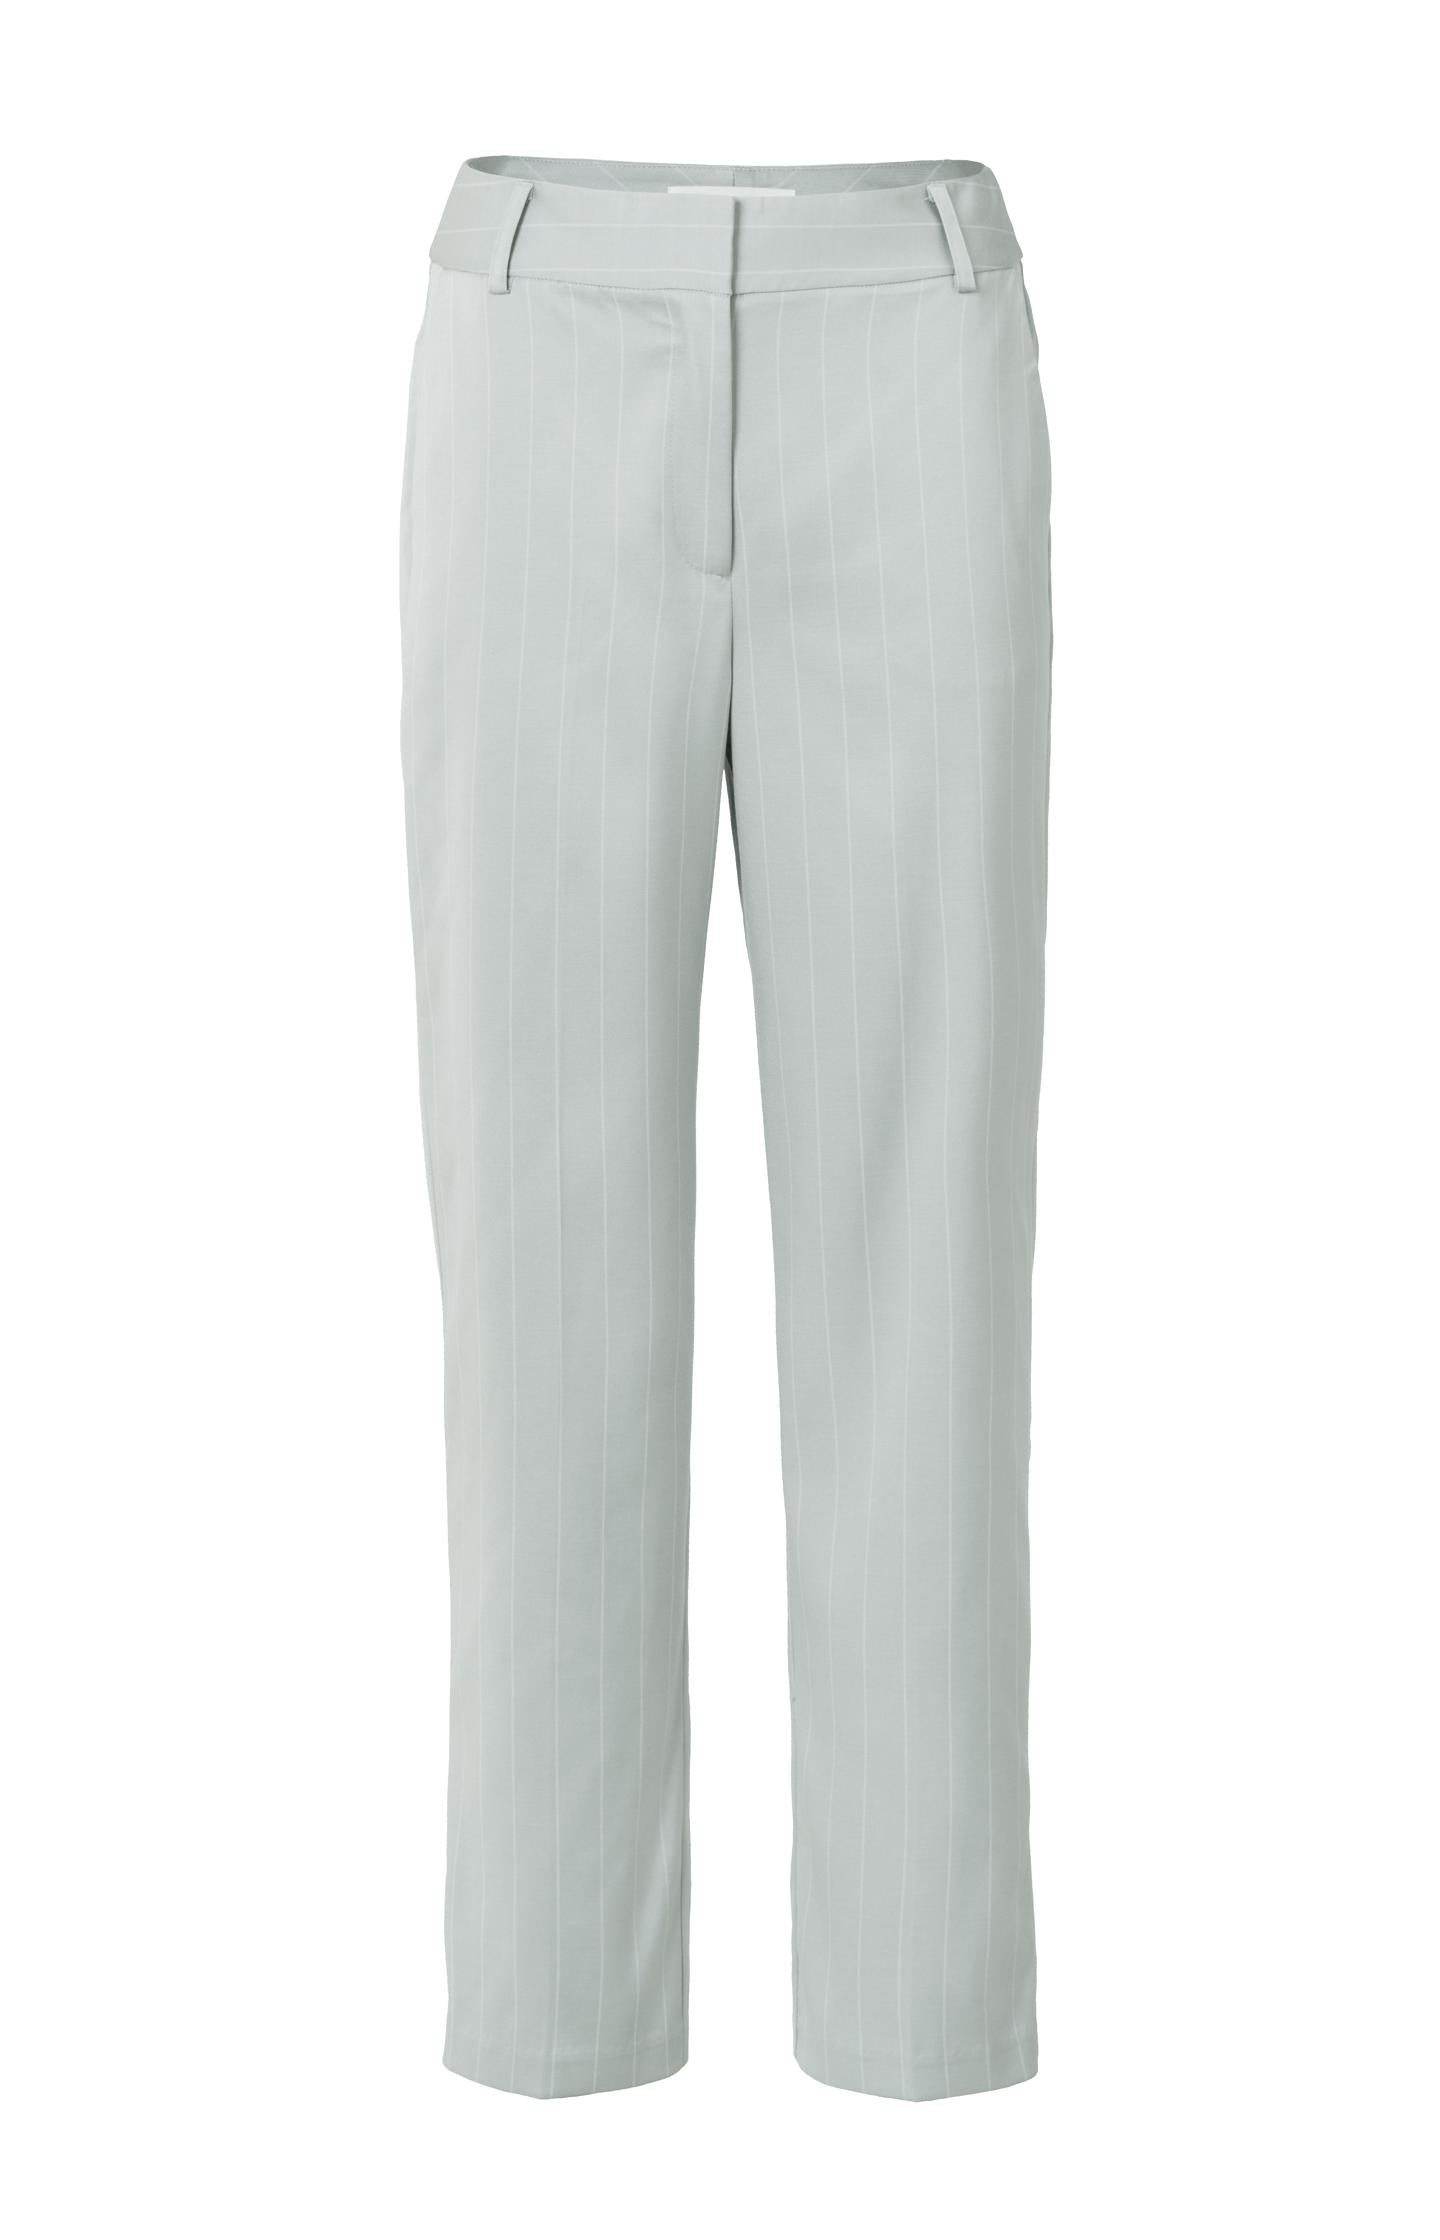 Loose fit pantalon with zip fly, pockets and stripes - Type: product